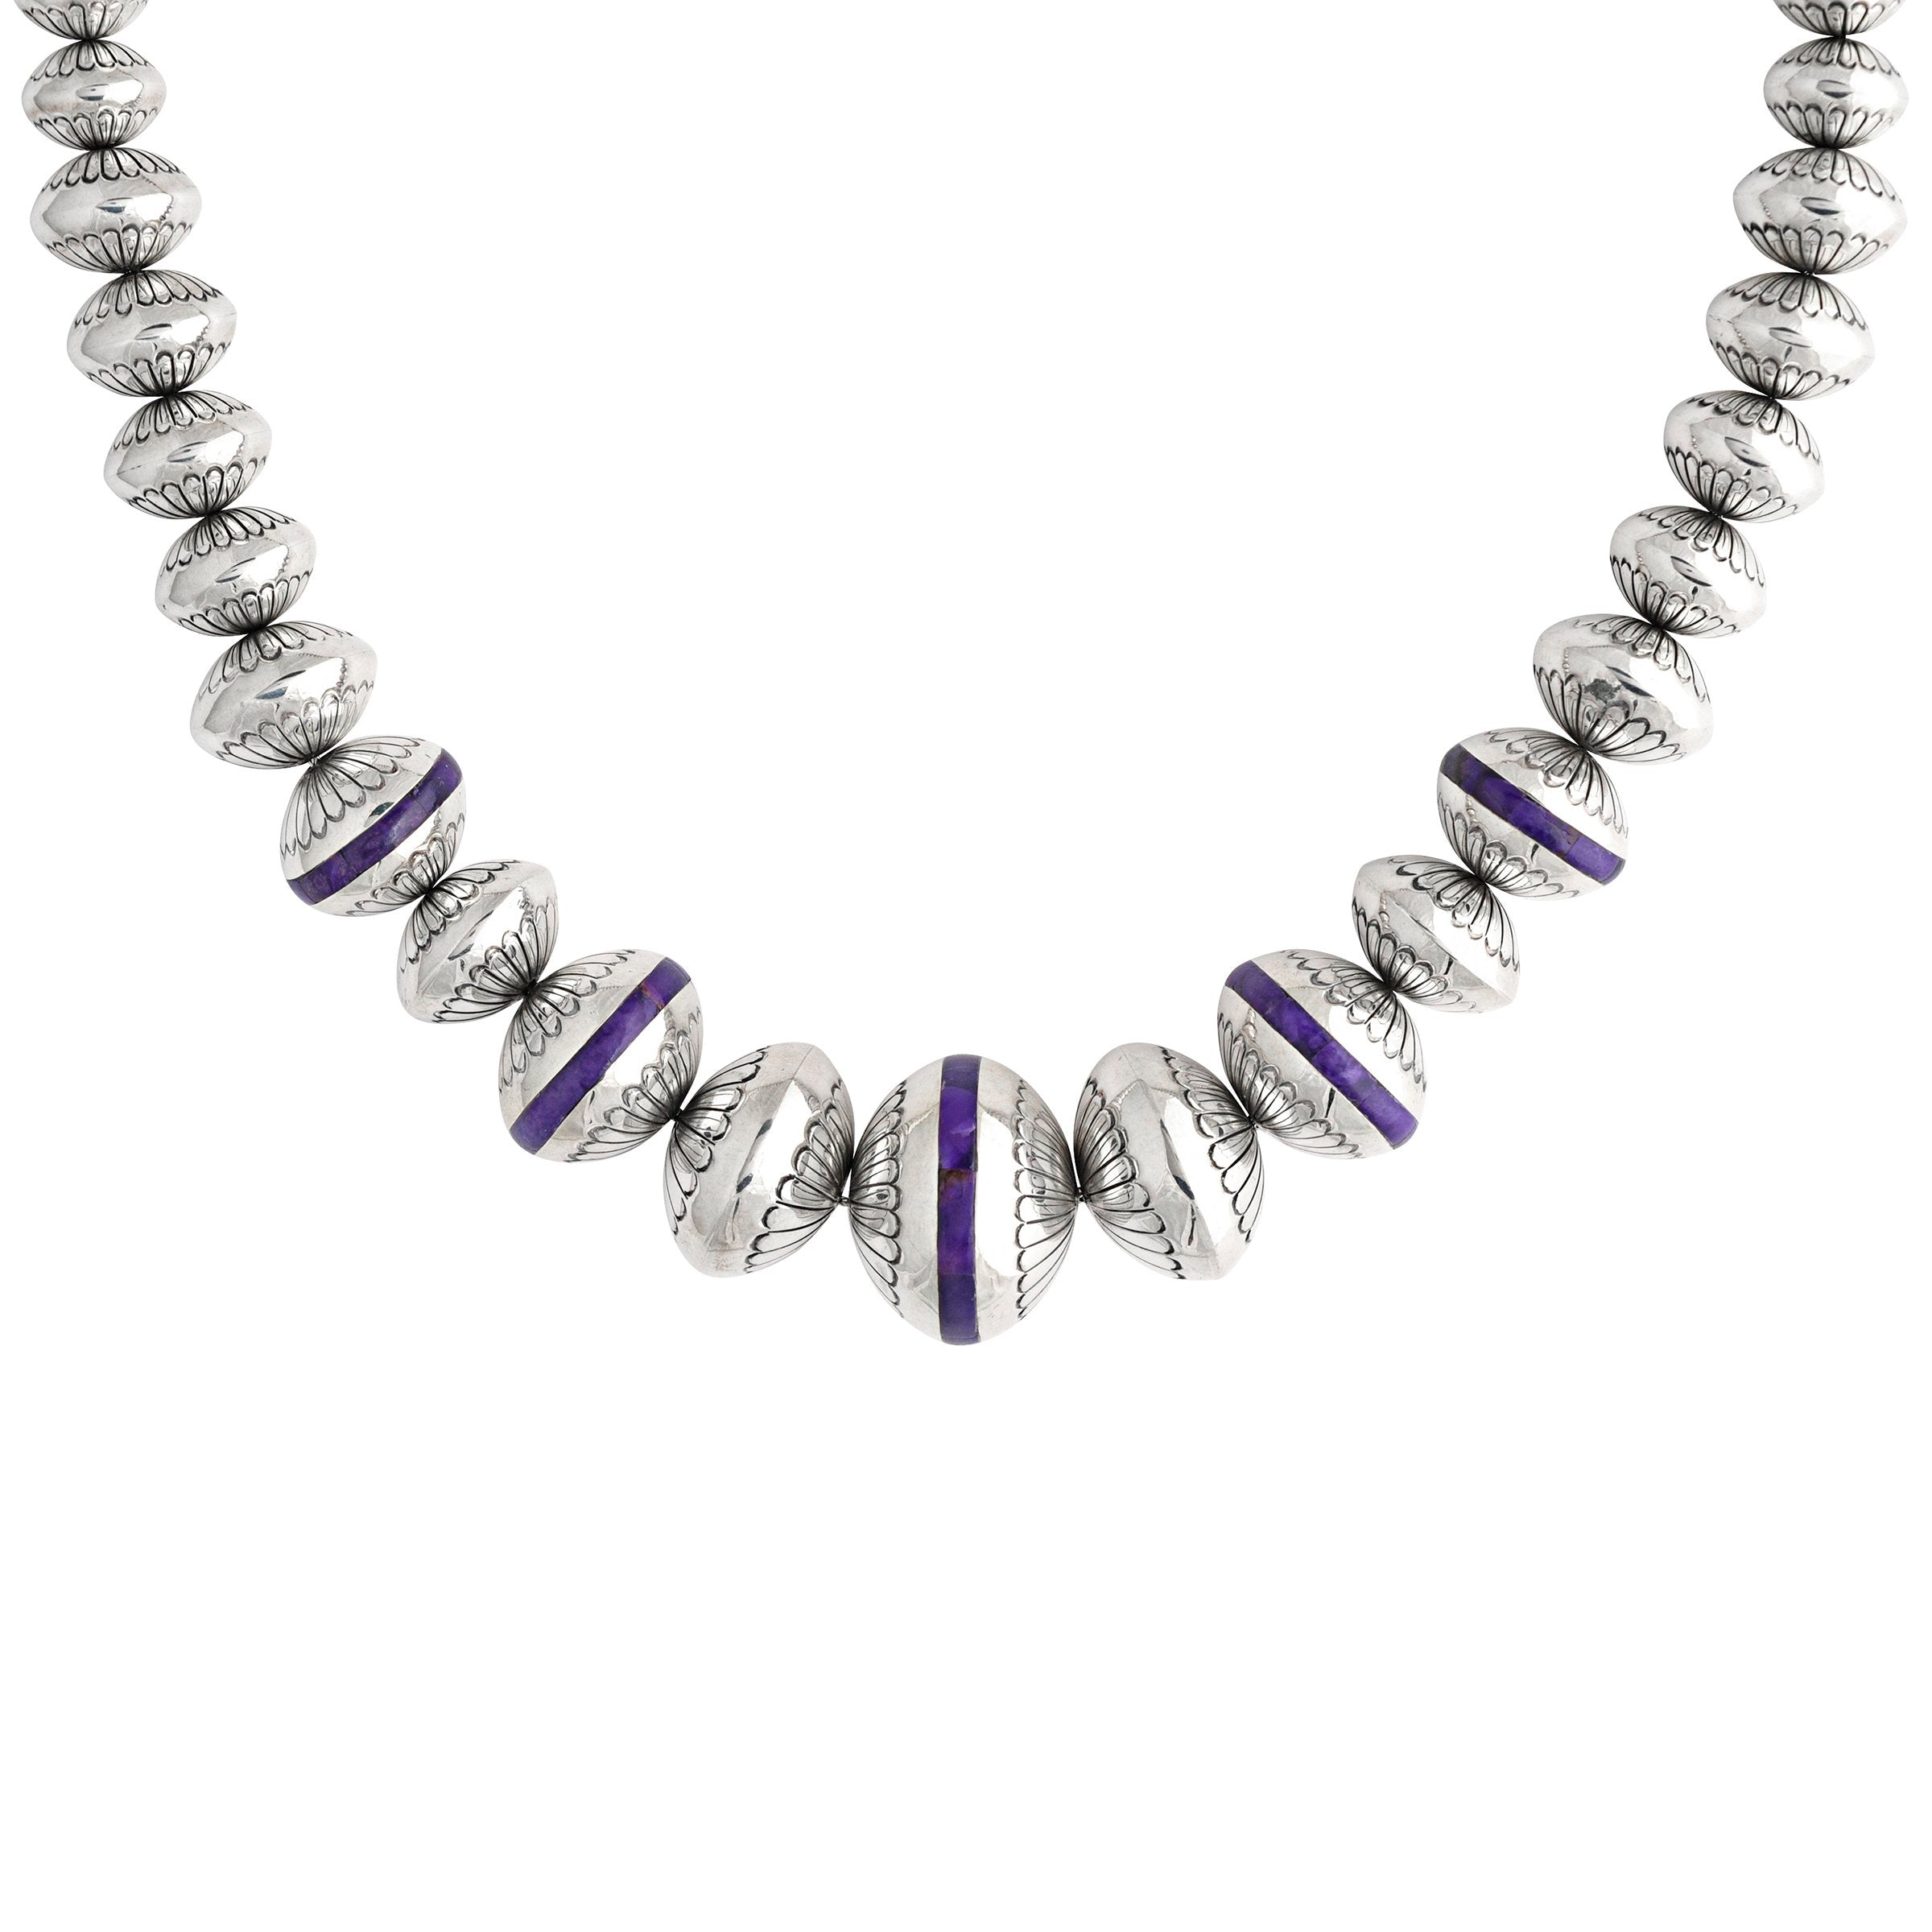 Marie Yazzie Desert Pearl With Sugilite Necklace